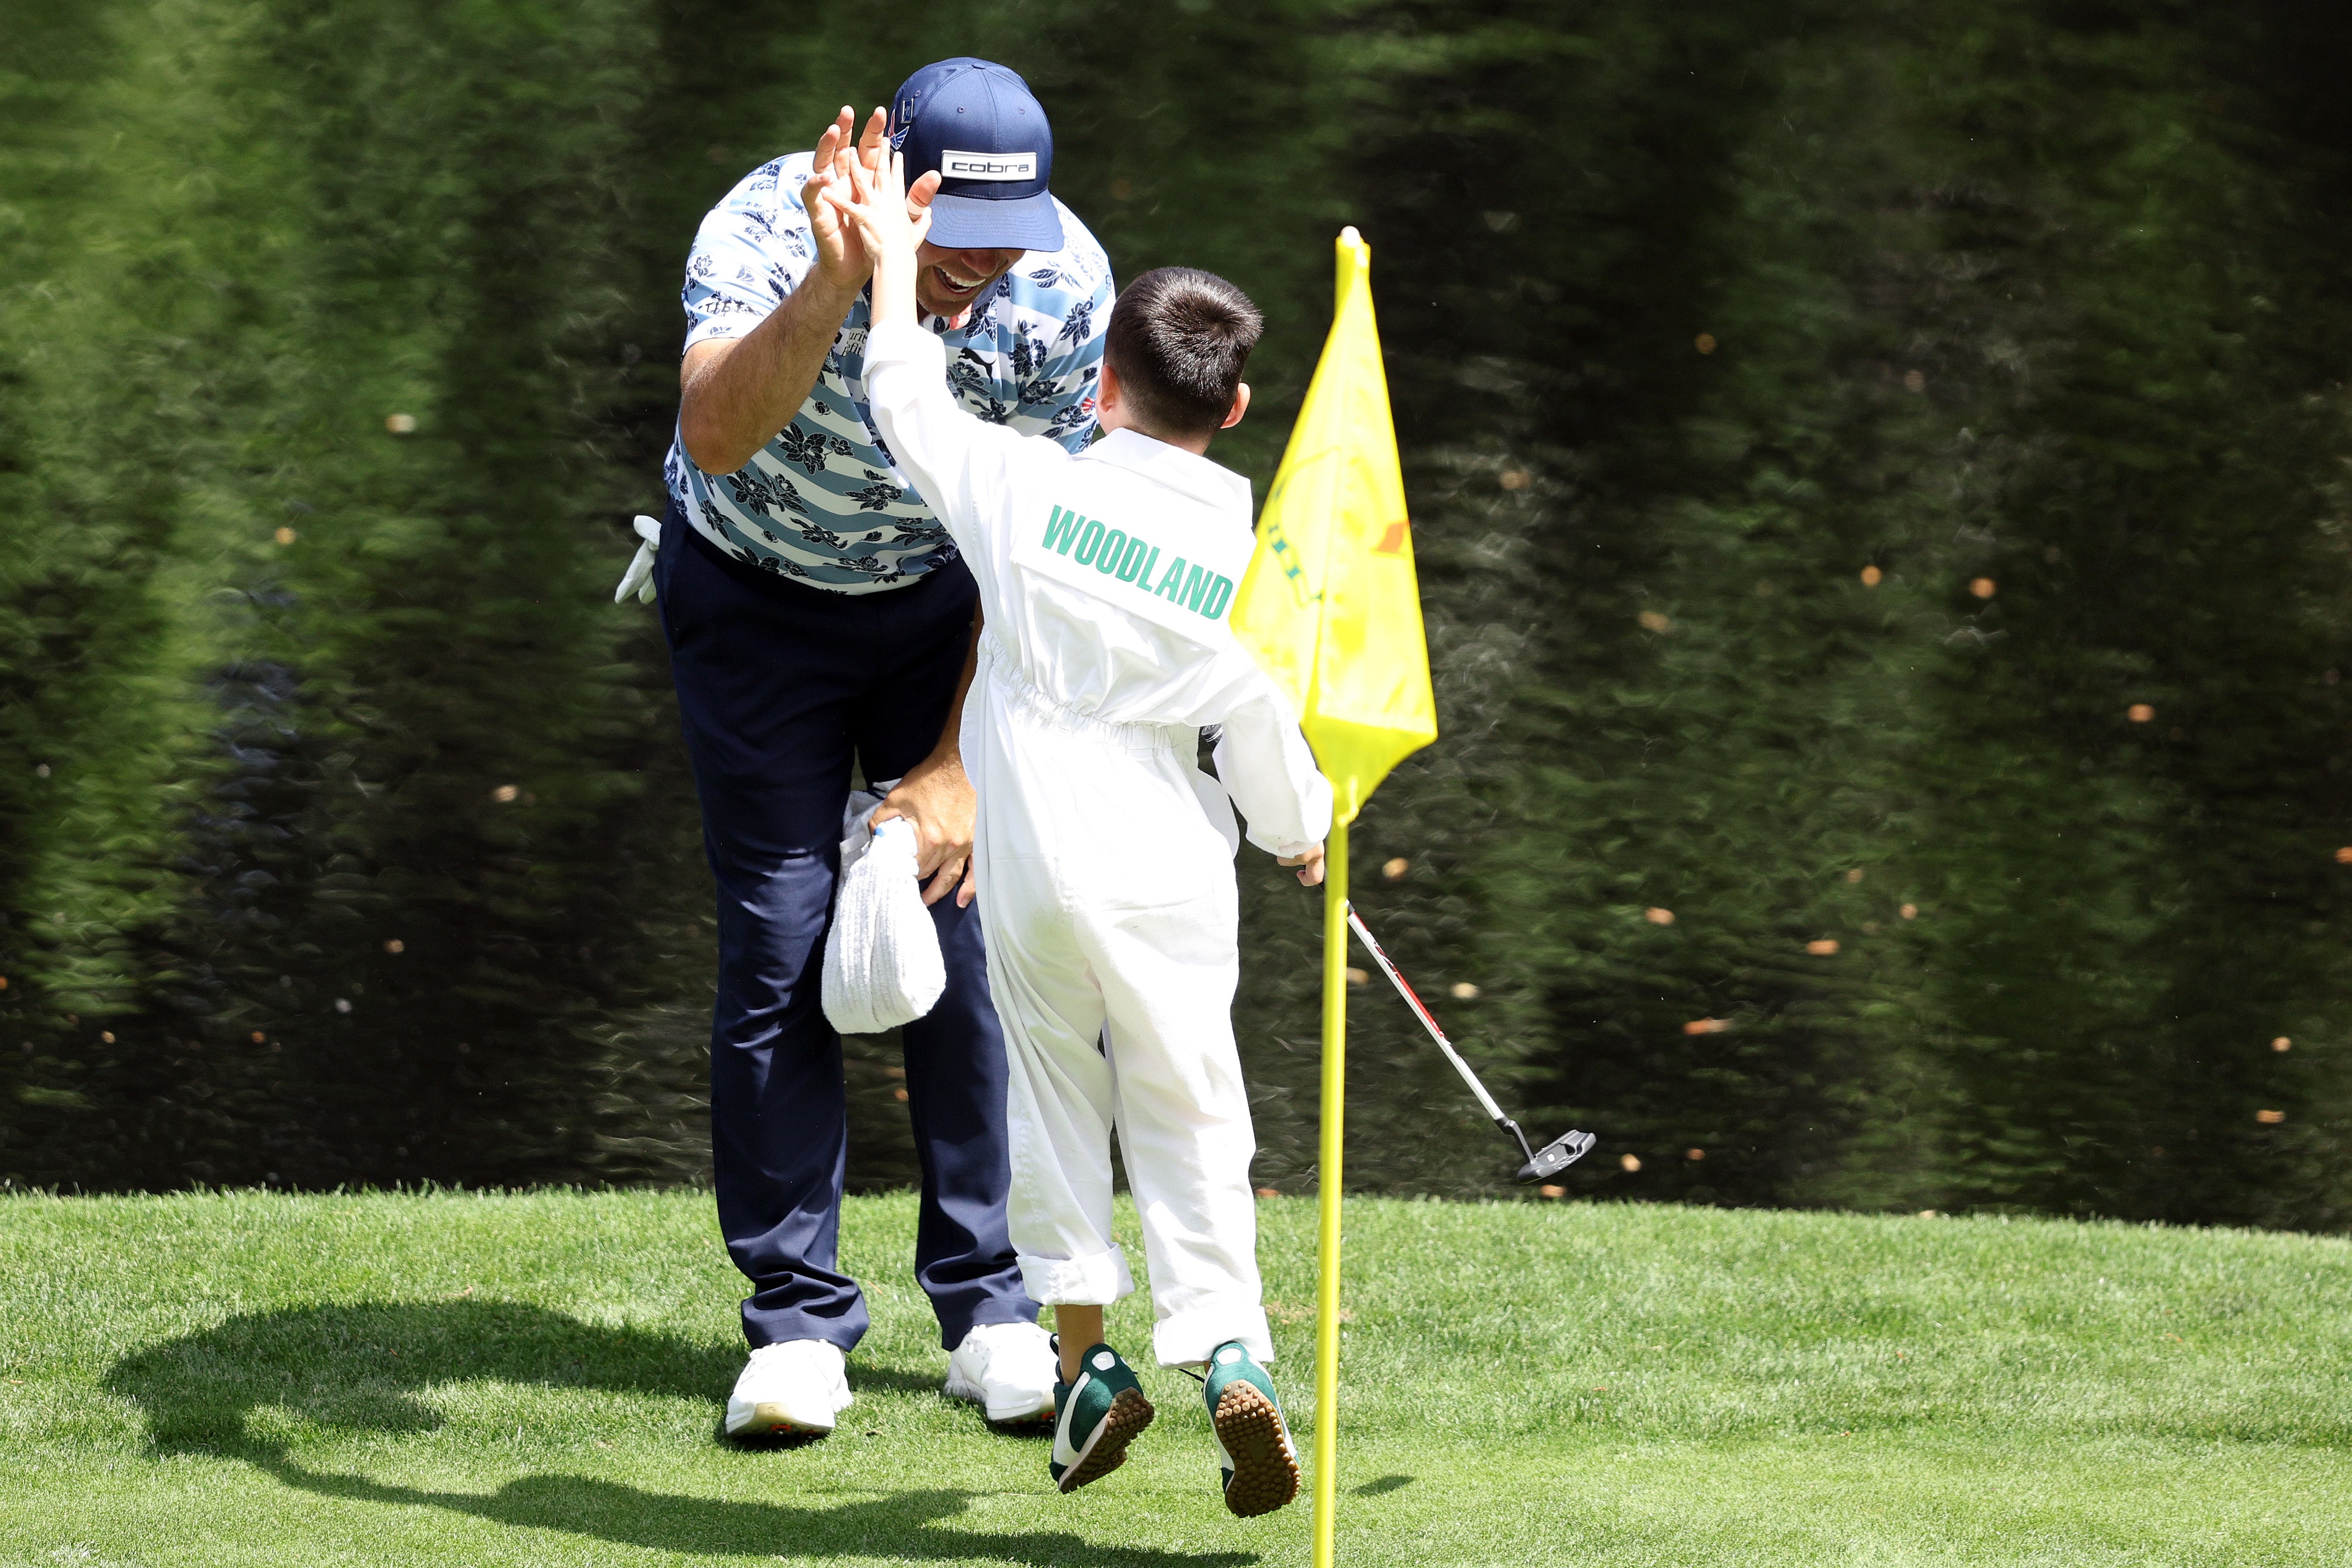 Gary Woodland hit a career first hole-in-one at The Masters par three day after recovering from surgery.